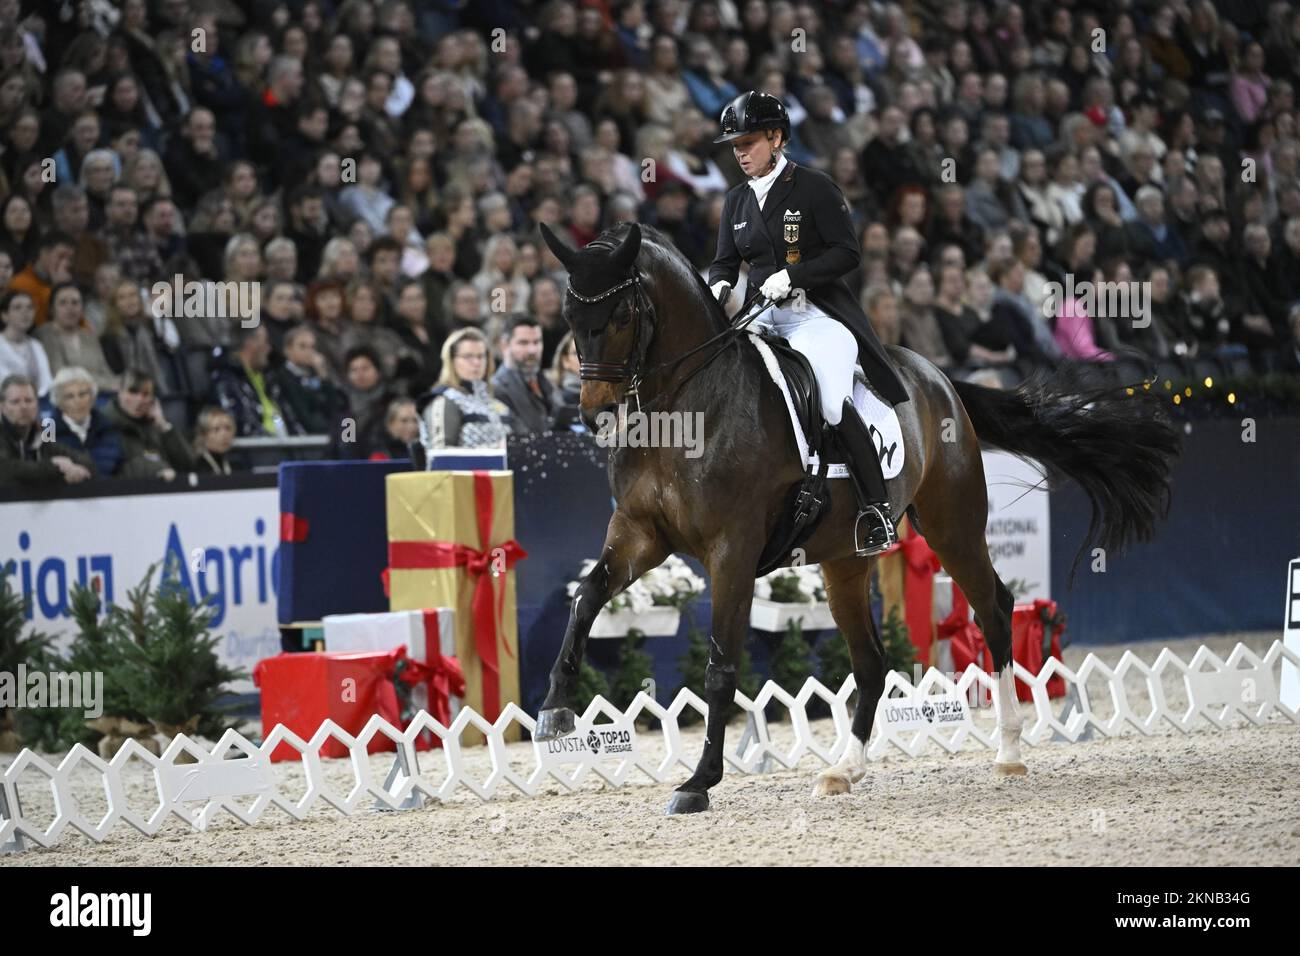 Isabell Werth of Germany riding DSP Quantaz during the FEI Grand Prix kür dressage competition at the Sweden International Horse Show held at the Friends Arena, Stockholm, Sweden November 27, 2022. Photo: Fredrik Sandberg/ TT / kod 10080 Stock Photo